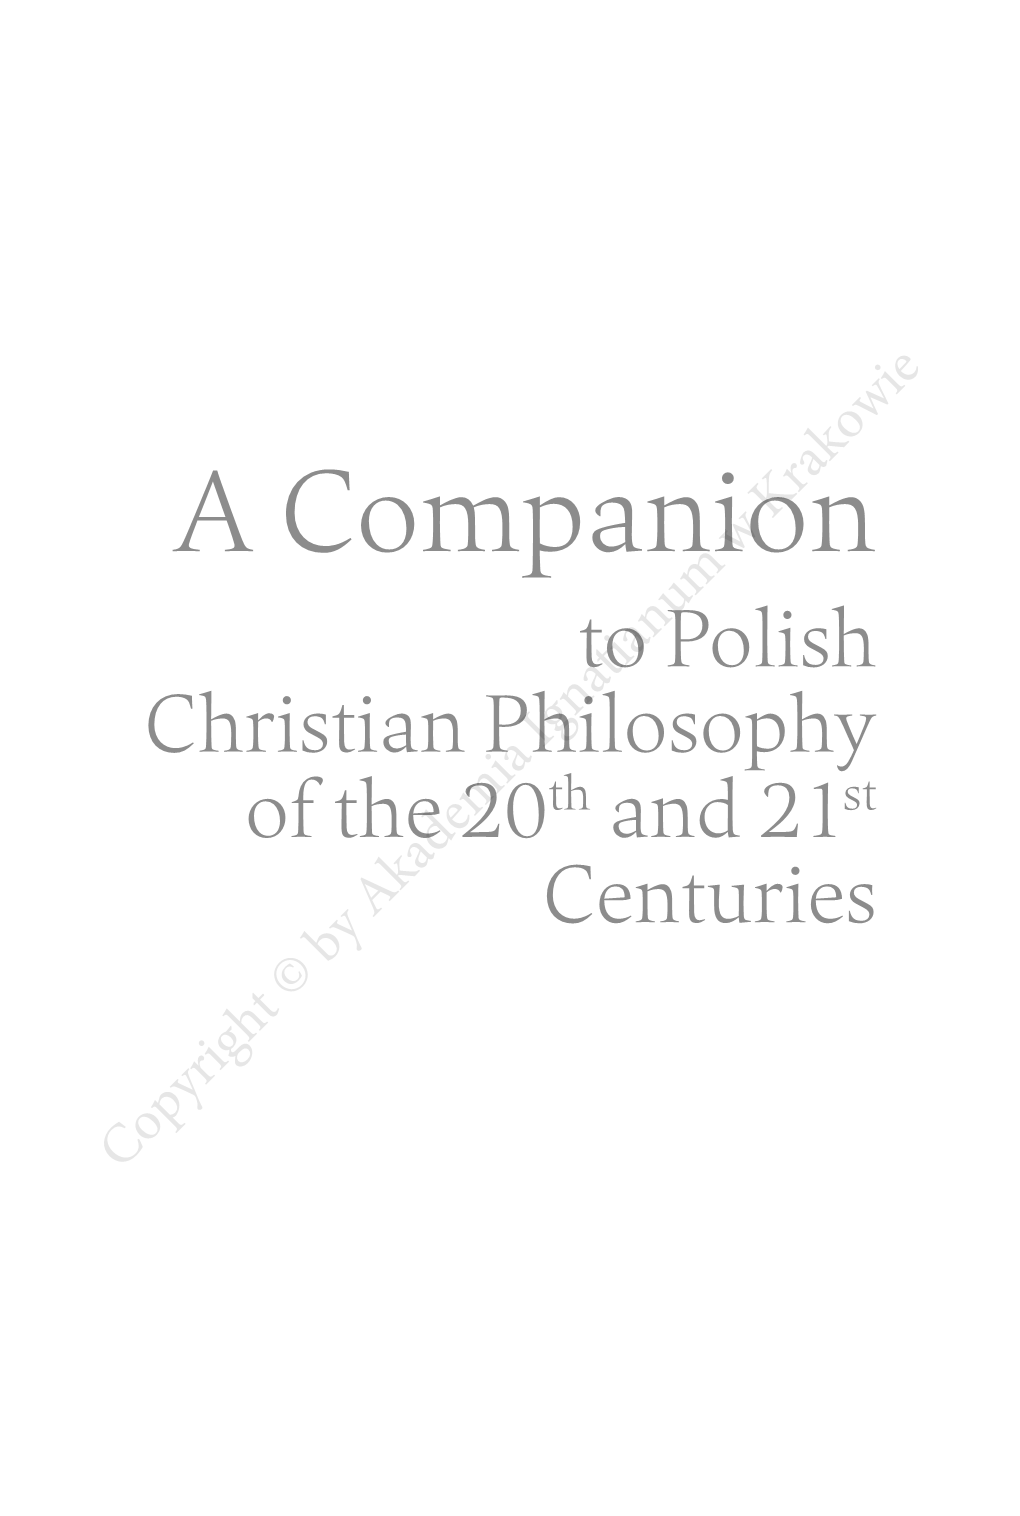 A Companion to Polish Christian Philosophy of the 20Th and 21St Centuries